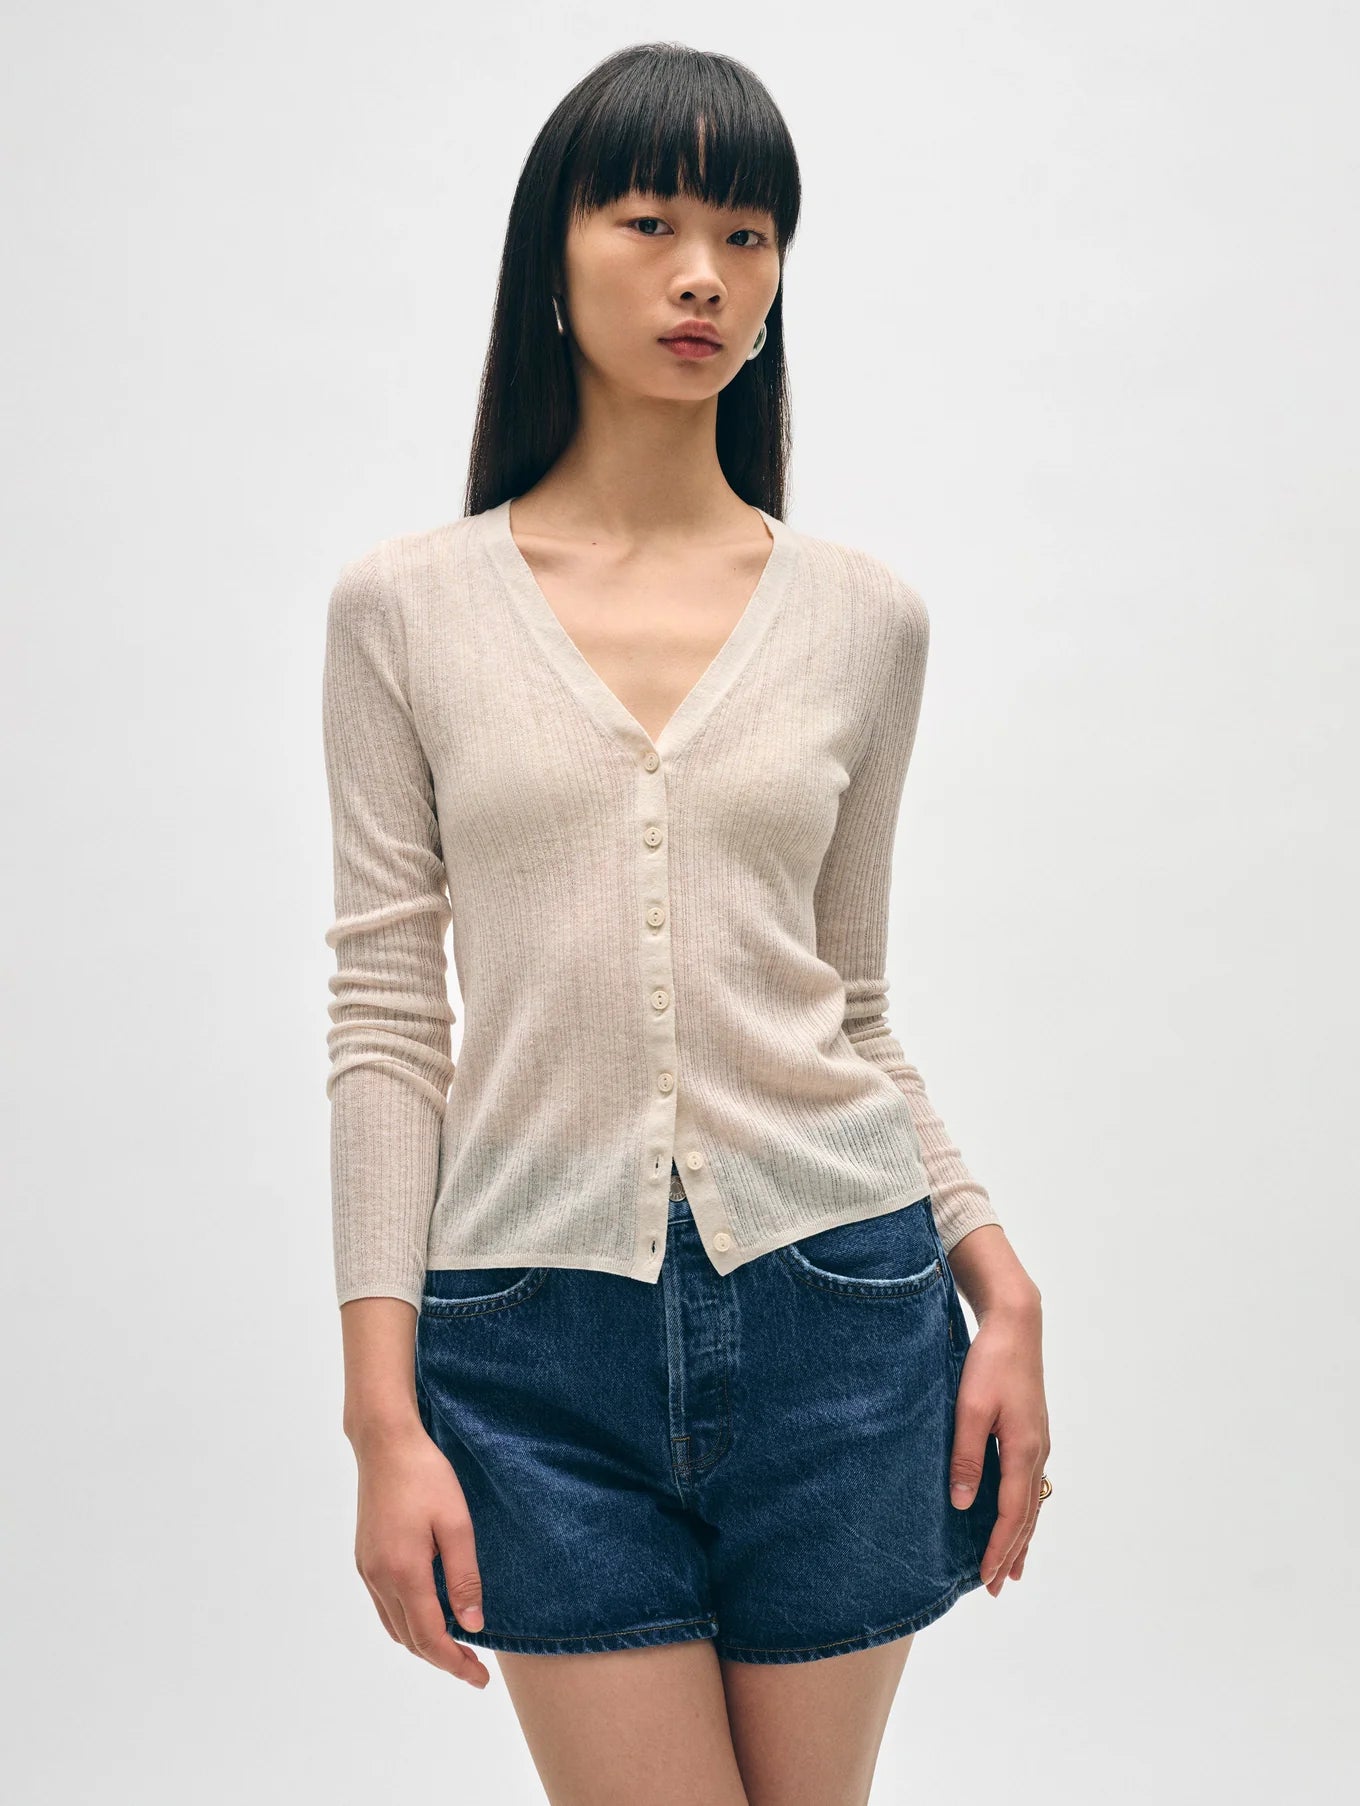 White and Warren's Linen Gauze Ribbed V Neck Cardigan in the color Calico